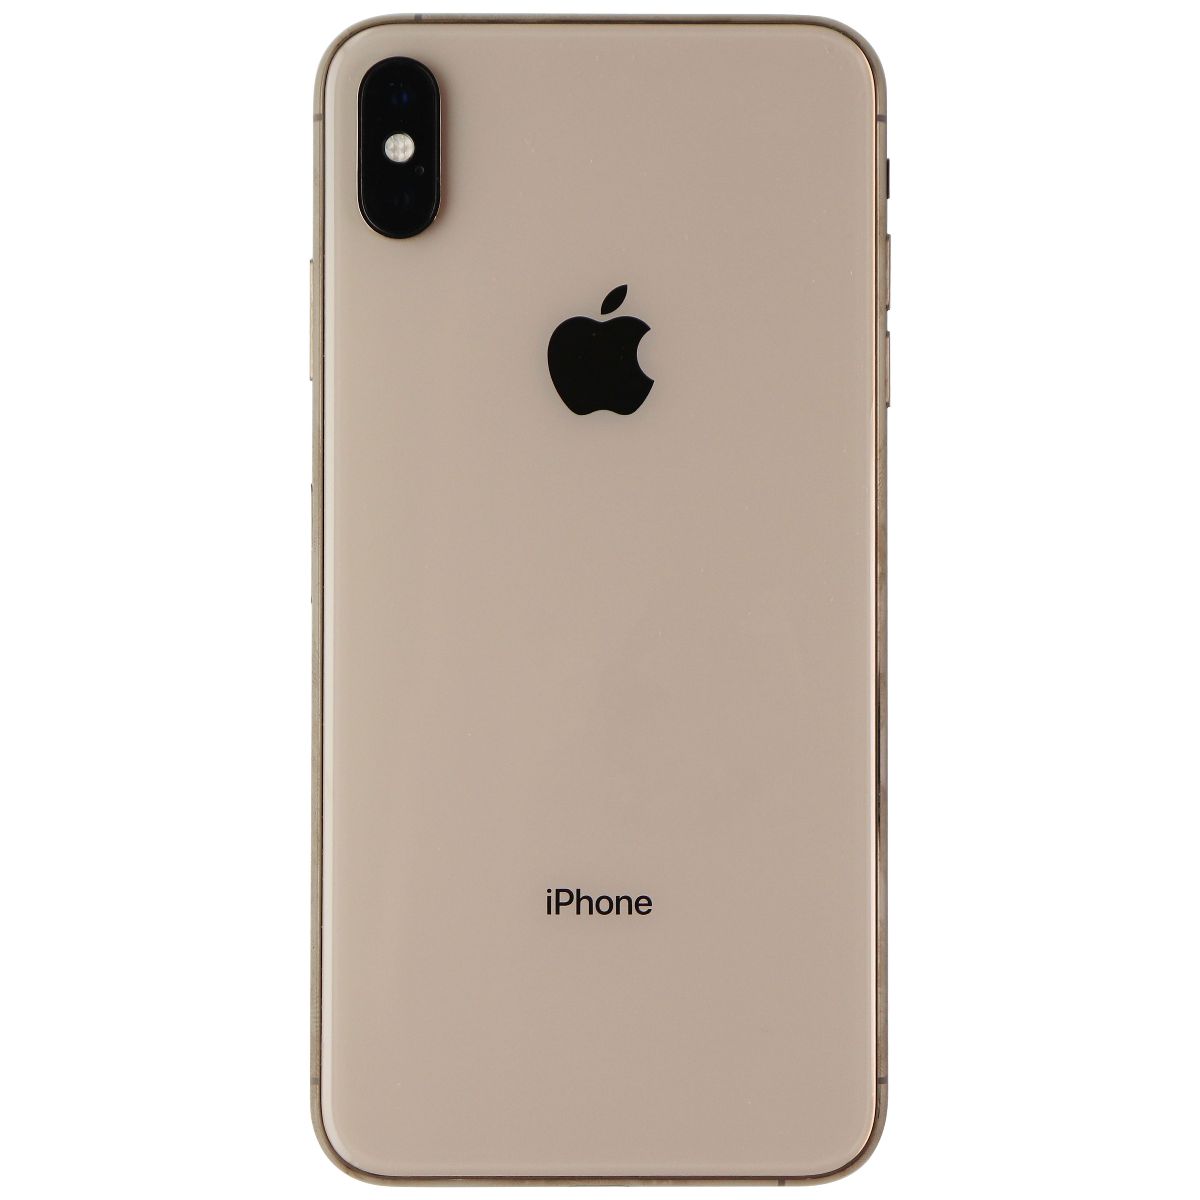 Apple iPhone XS Max (6.5-inch) (A2101) Unlocked 512GB / Gold - Bad Face ID Cell Phones & Smartphones Apple    - Simple Cell Bulk Wholesale Pricing - USA Seller